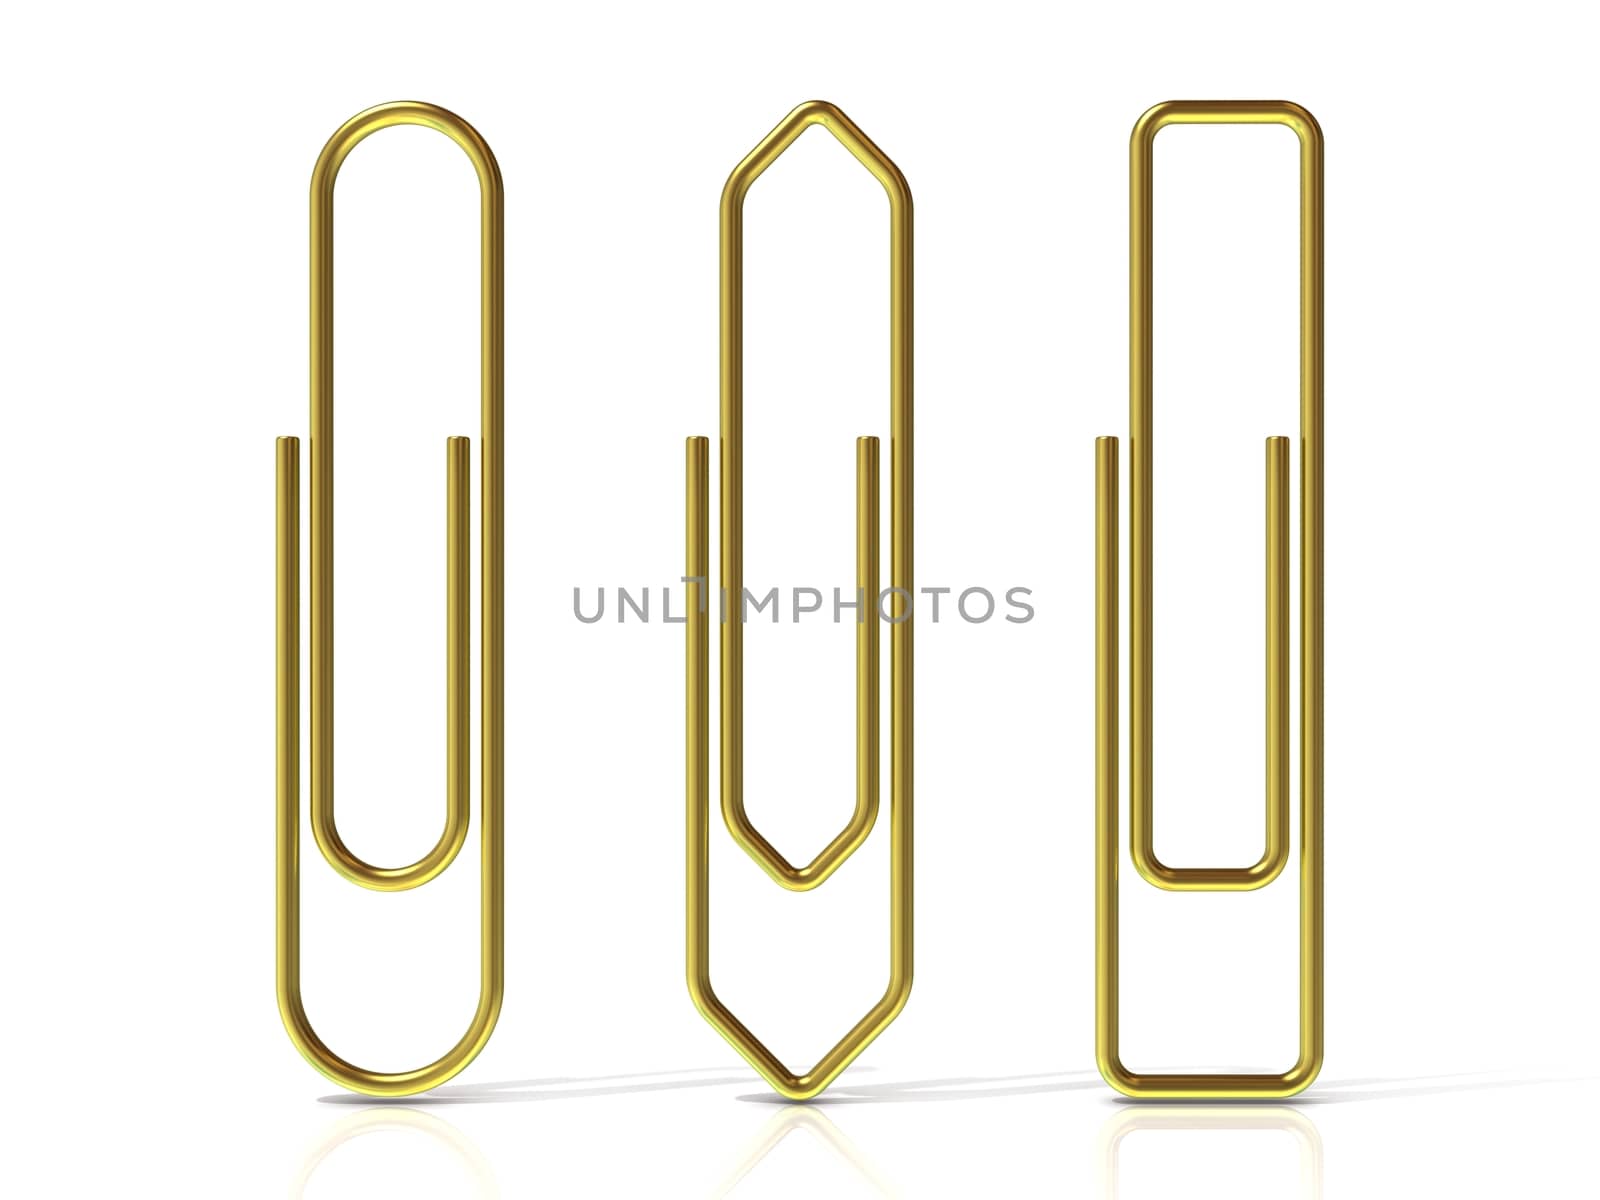 Paper clips. Three basic shapes. Brass by djmilic